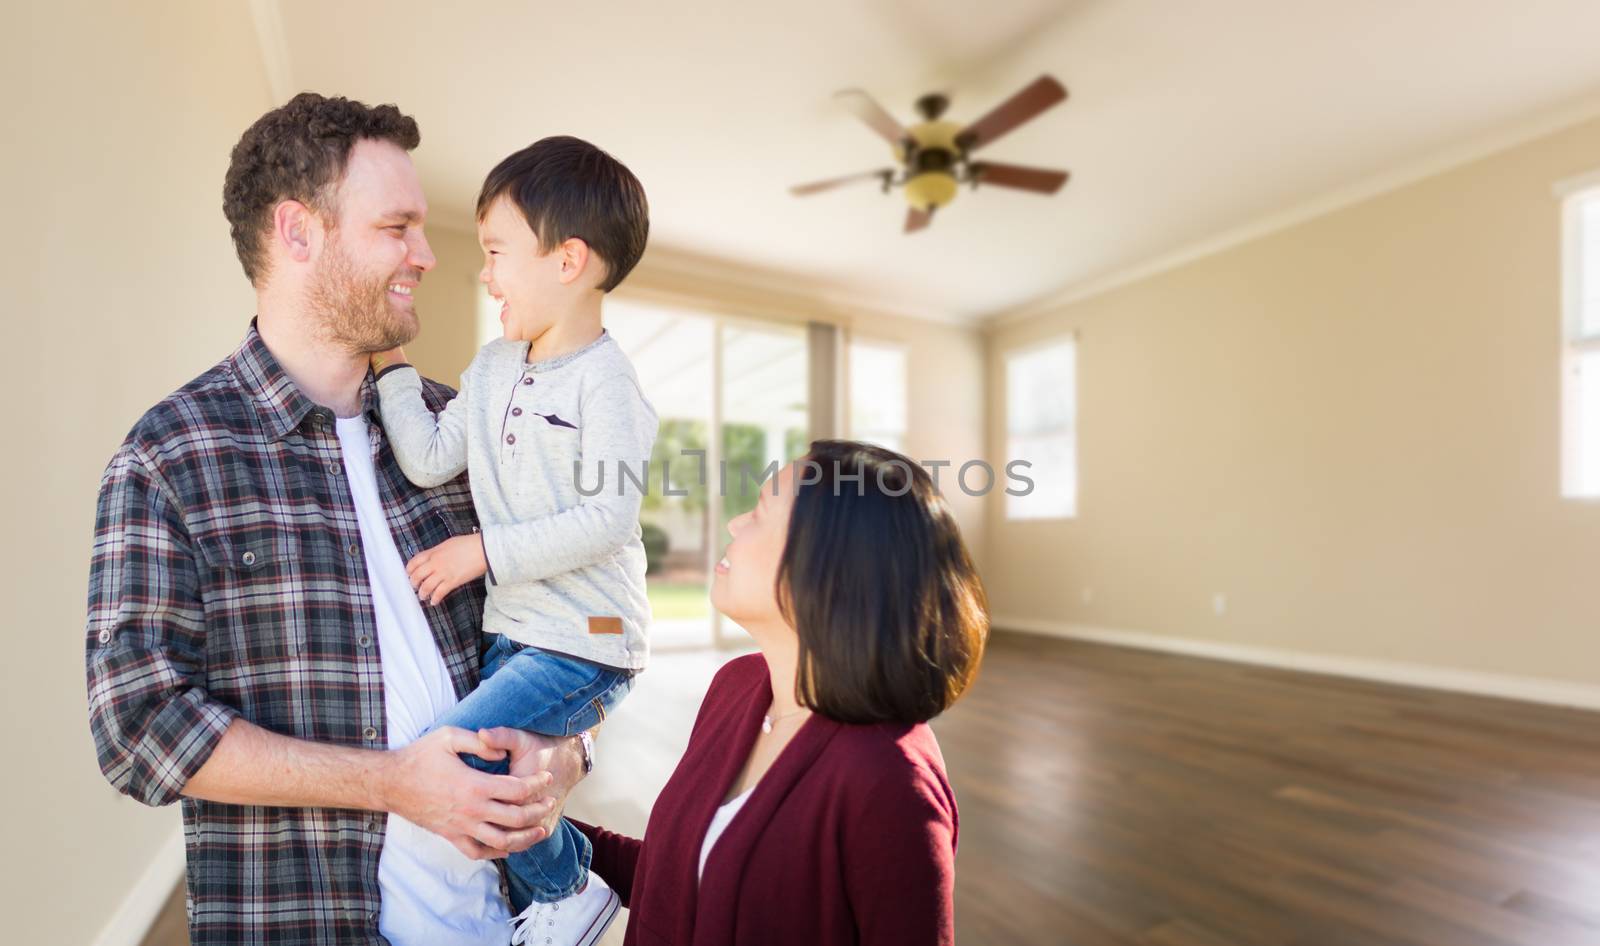 Young Mixed Race Caucasian and Chinese Family Inside Empty Room with Wood Floors.